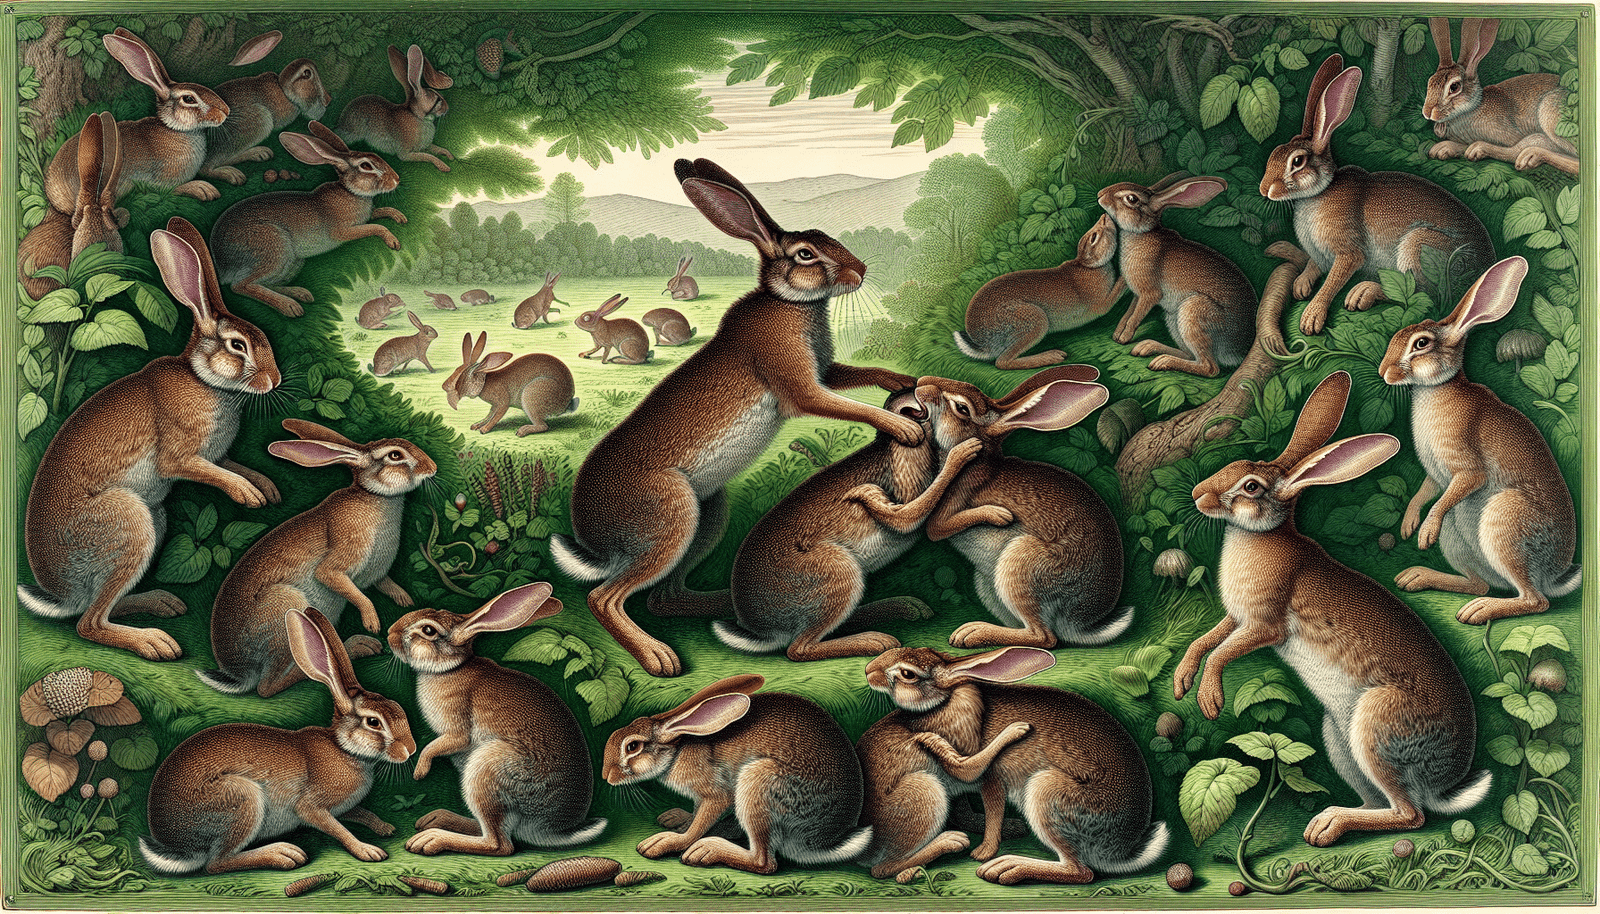 Illustration of rabbits communicating in a social group